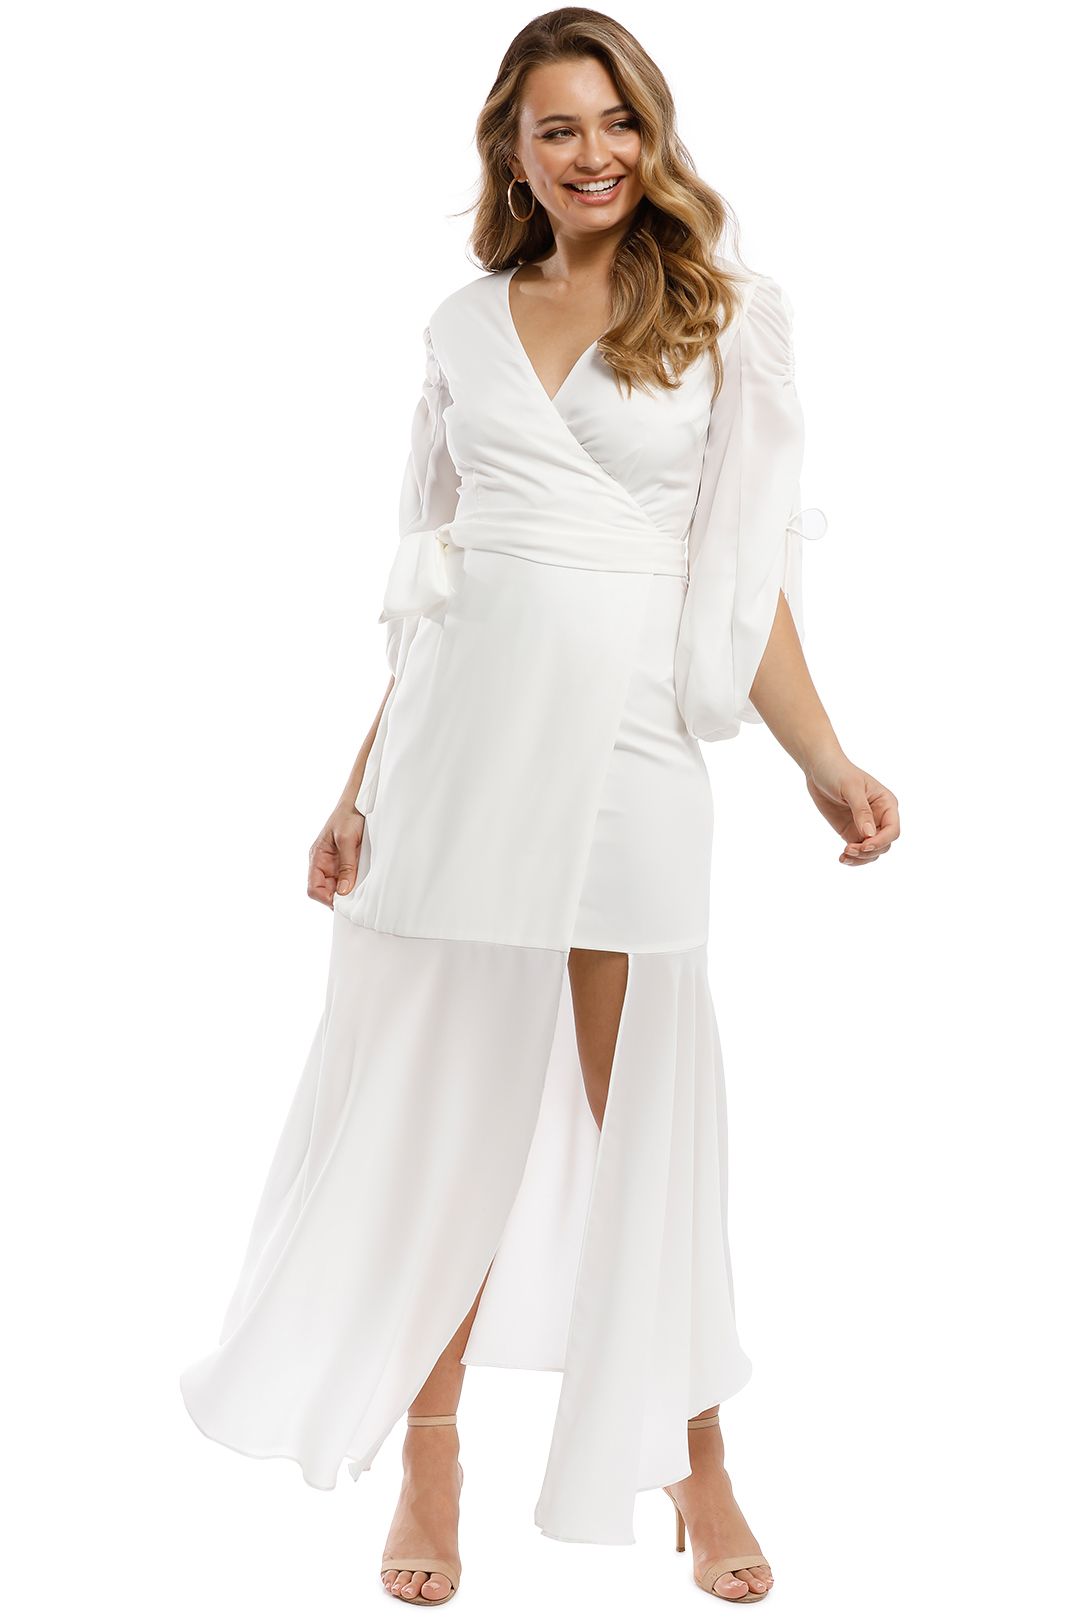 CMEO Collective - Favours Gown - Ivory - Front